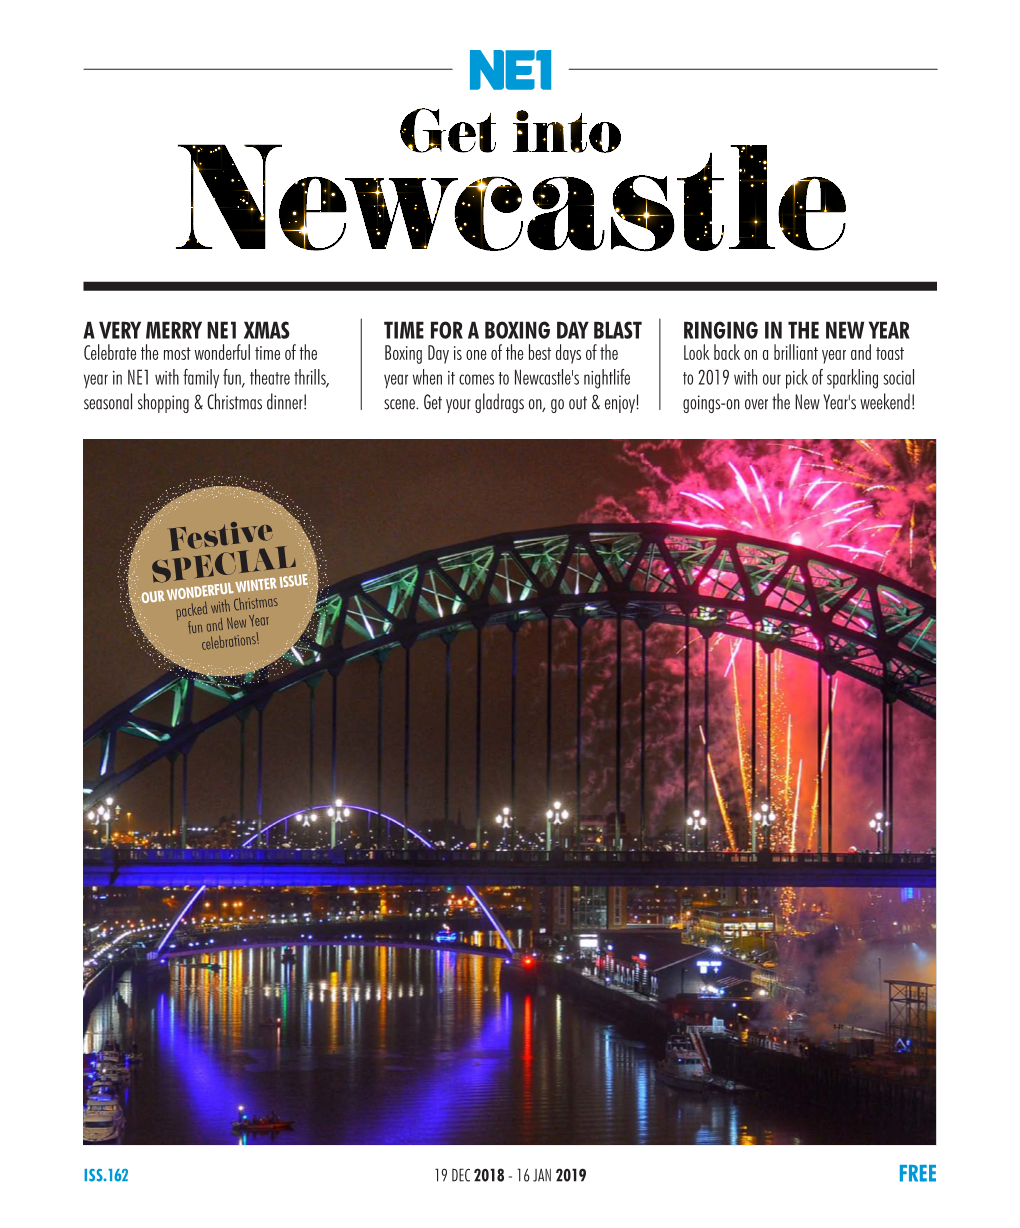 Festive SPECIAL OUR WONDERFUL WINTER ISSUE Packed with Christmas Fun and New Year Celebrations!